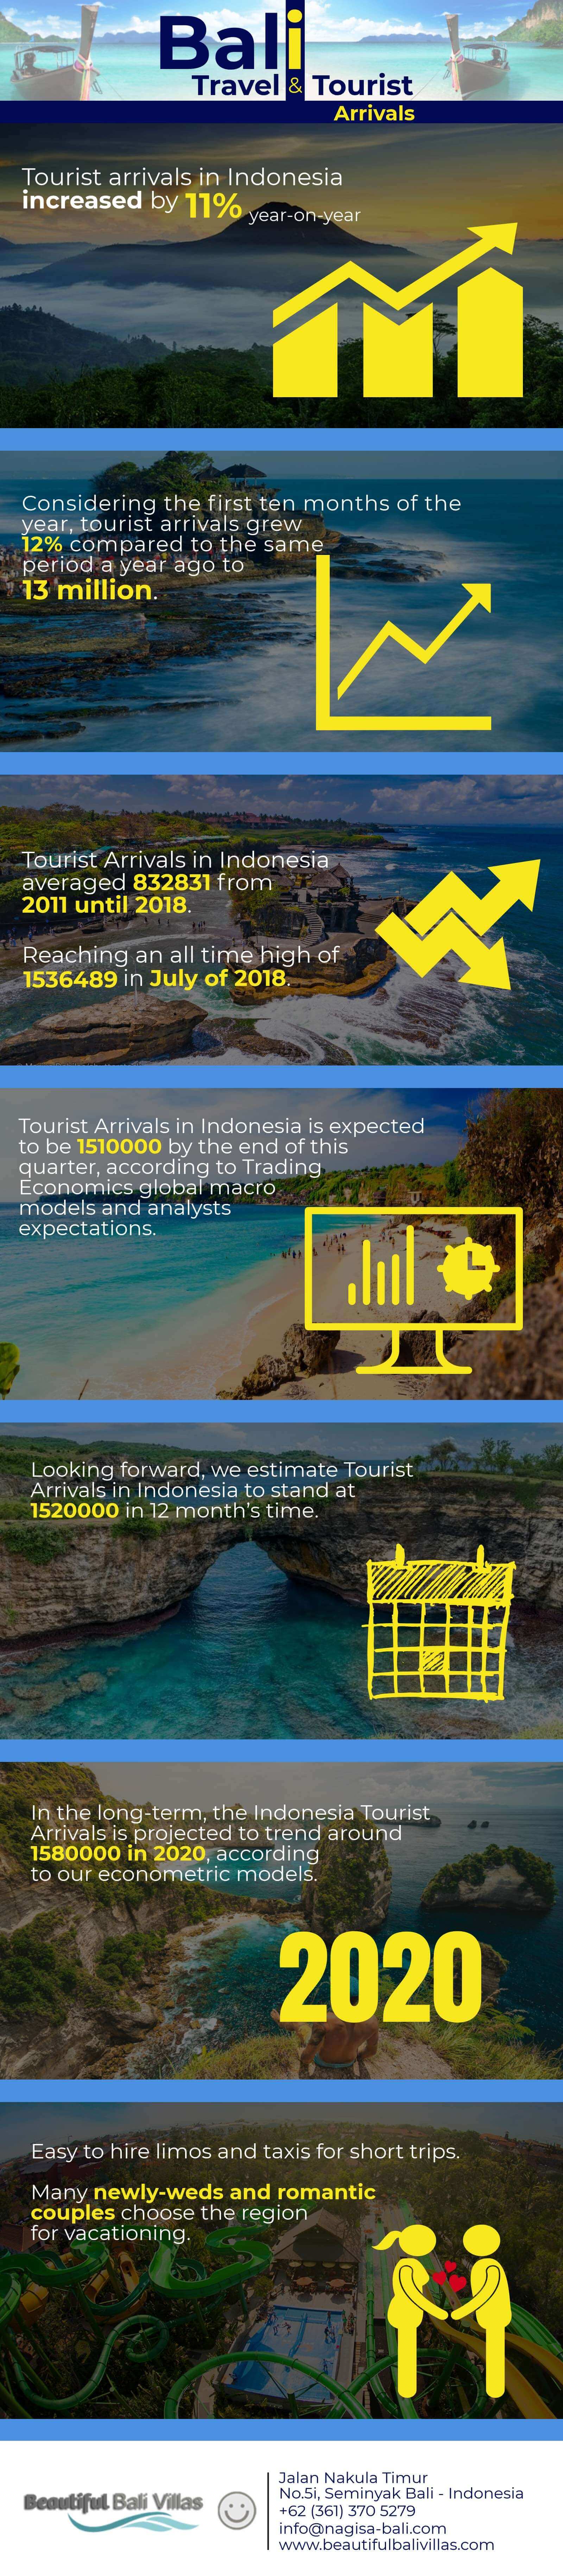 Bali Travel and Tourist Arrivals